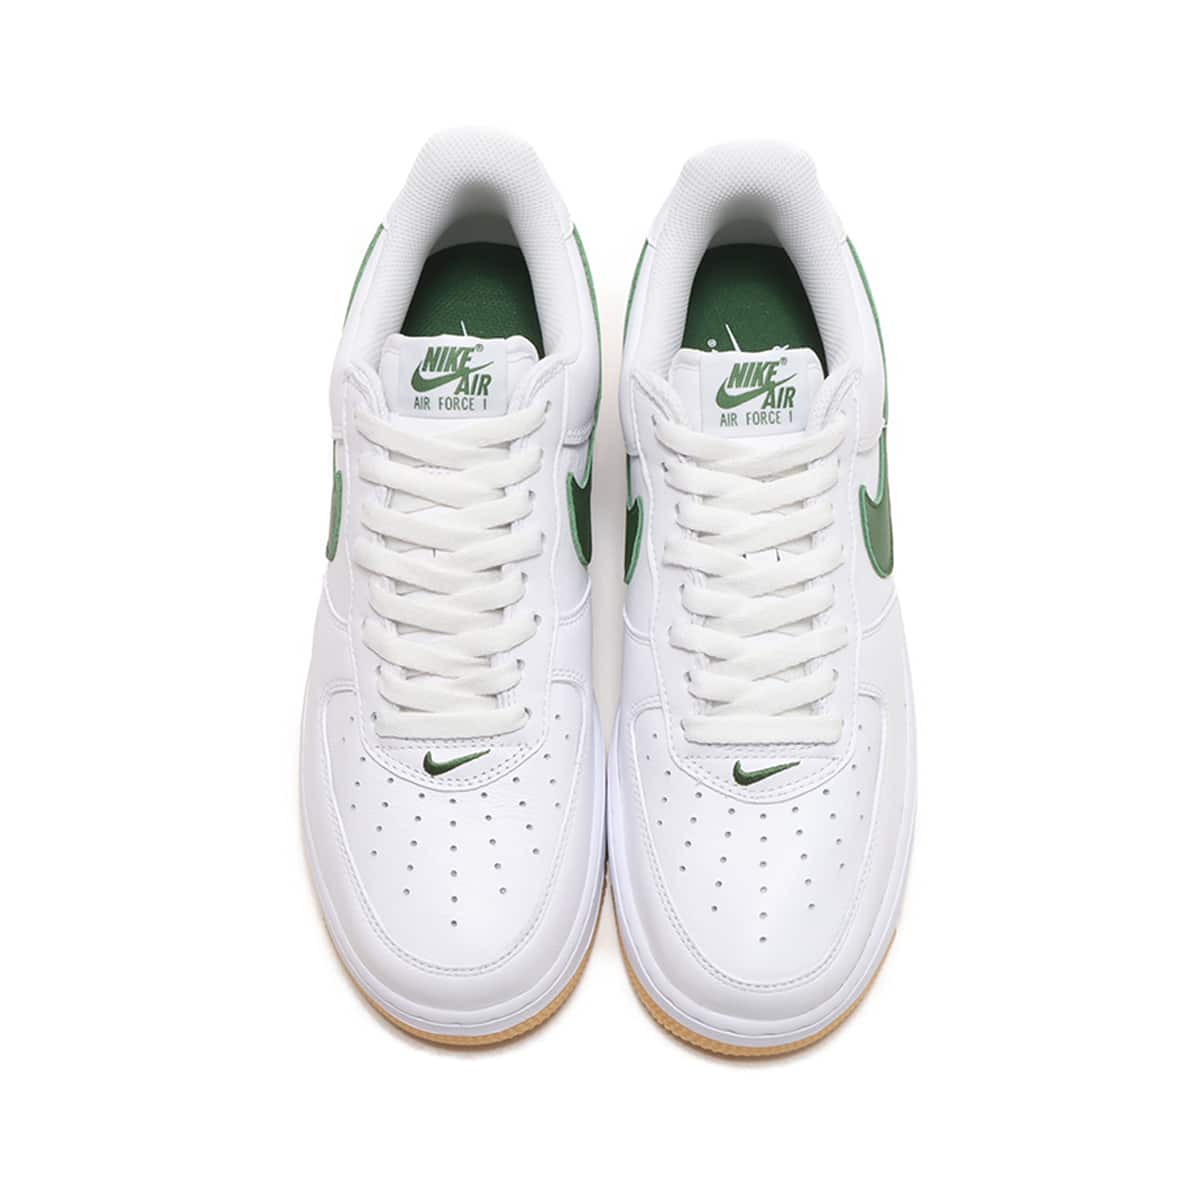 NIKE AIR FORCE 1 LOW RETRO QS WHITE/FOREST GREEN-GUM YELLOW 23FA-S